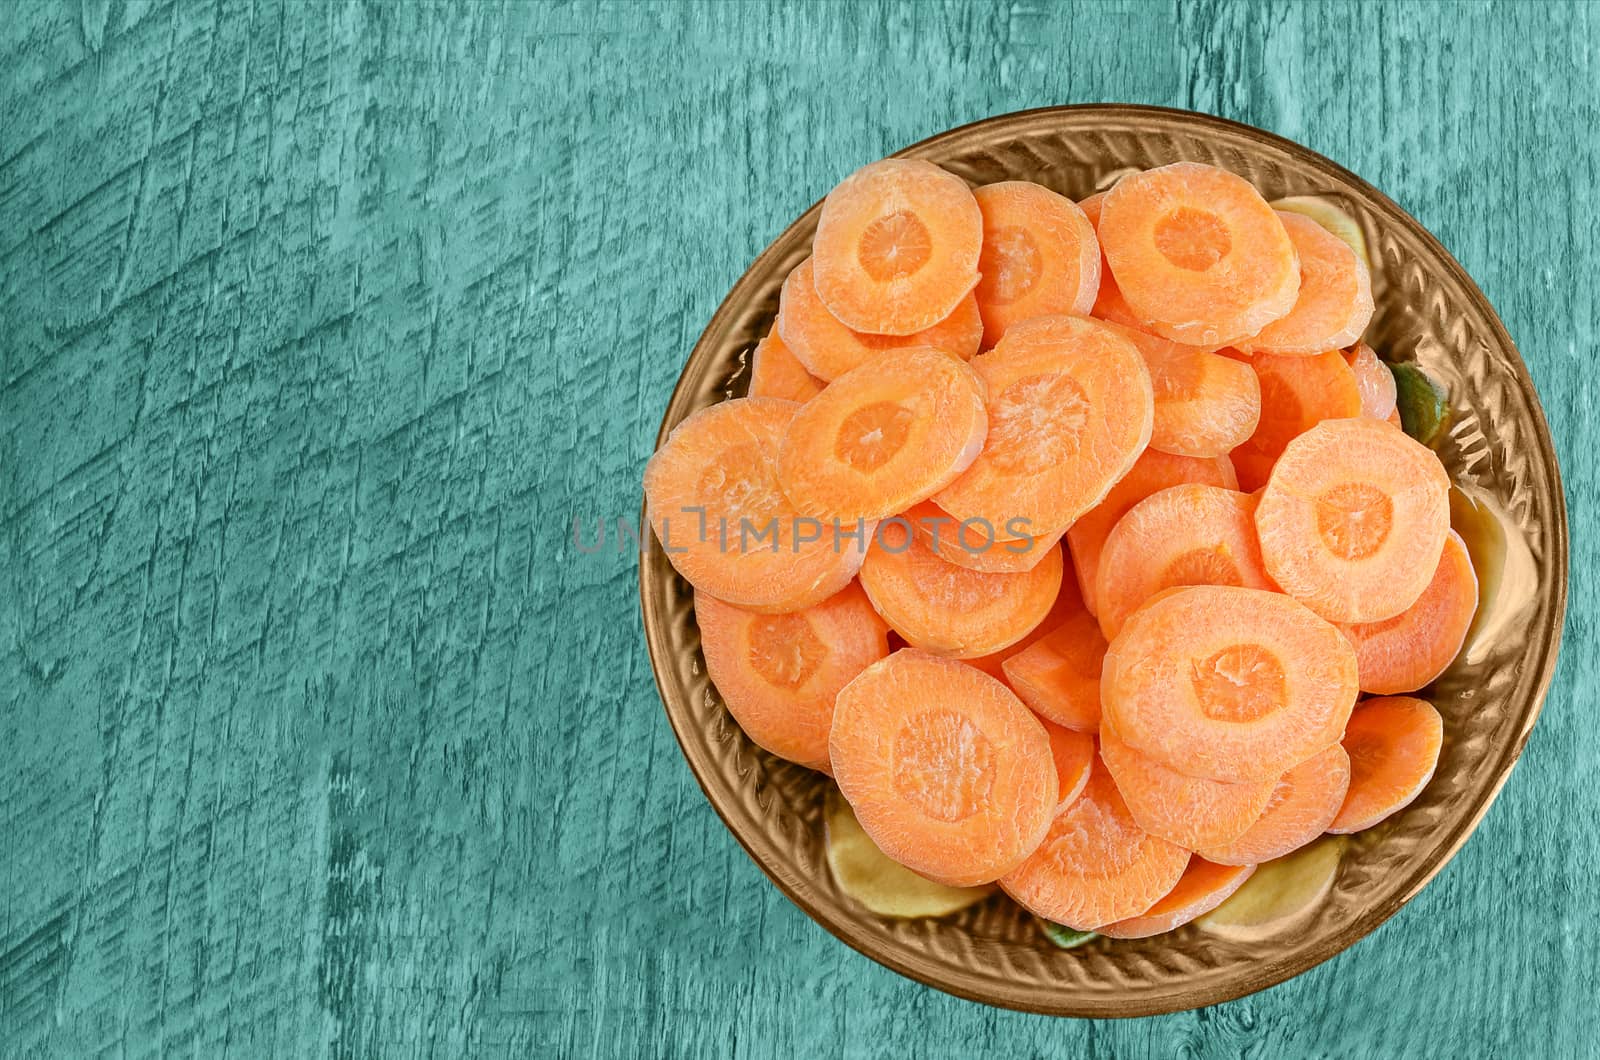 Sliced carrots in a bowl on wooden background. Tinted in blue-green color.